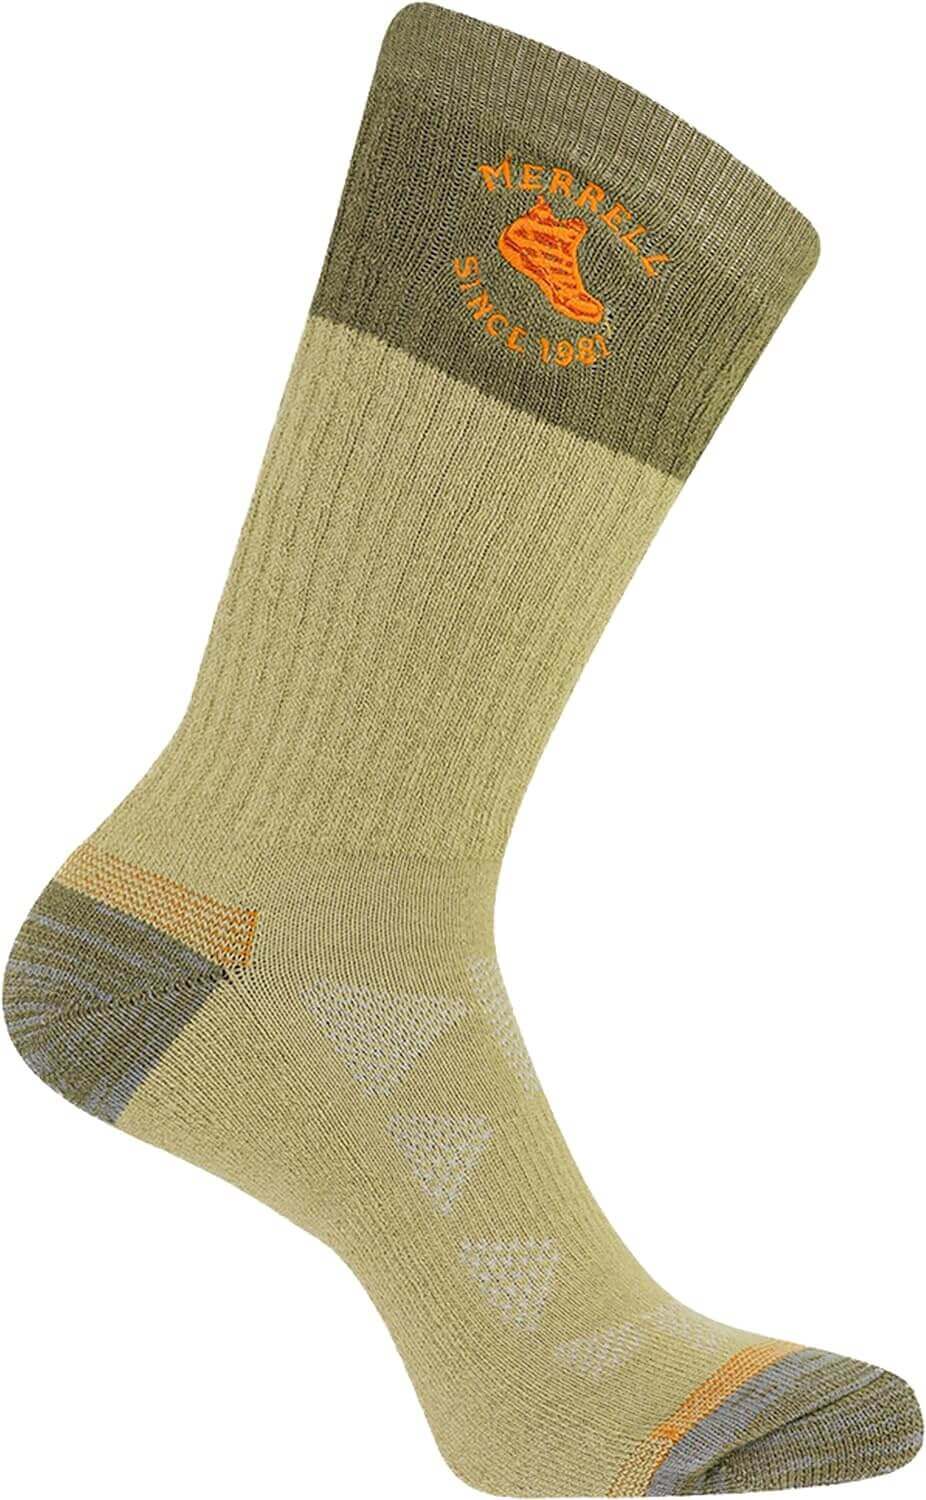 Shop The Latest >Merrell Men's and Women's Moab Hiking Mid Cushion Socks > *Only $18.00*> From The Top Brand > *Merrelll* > Shop Now and Get Free Shipping On Orders Over $45.00 >*Shop Earth Foot*